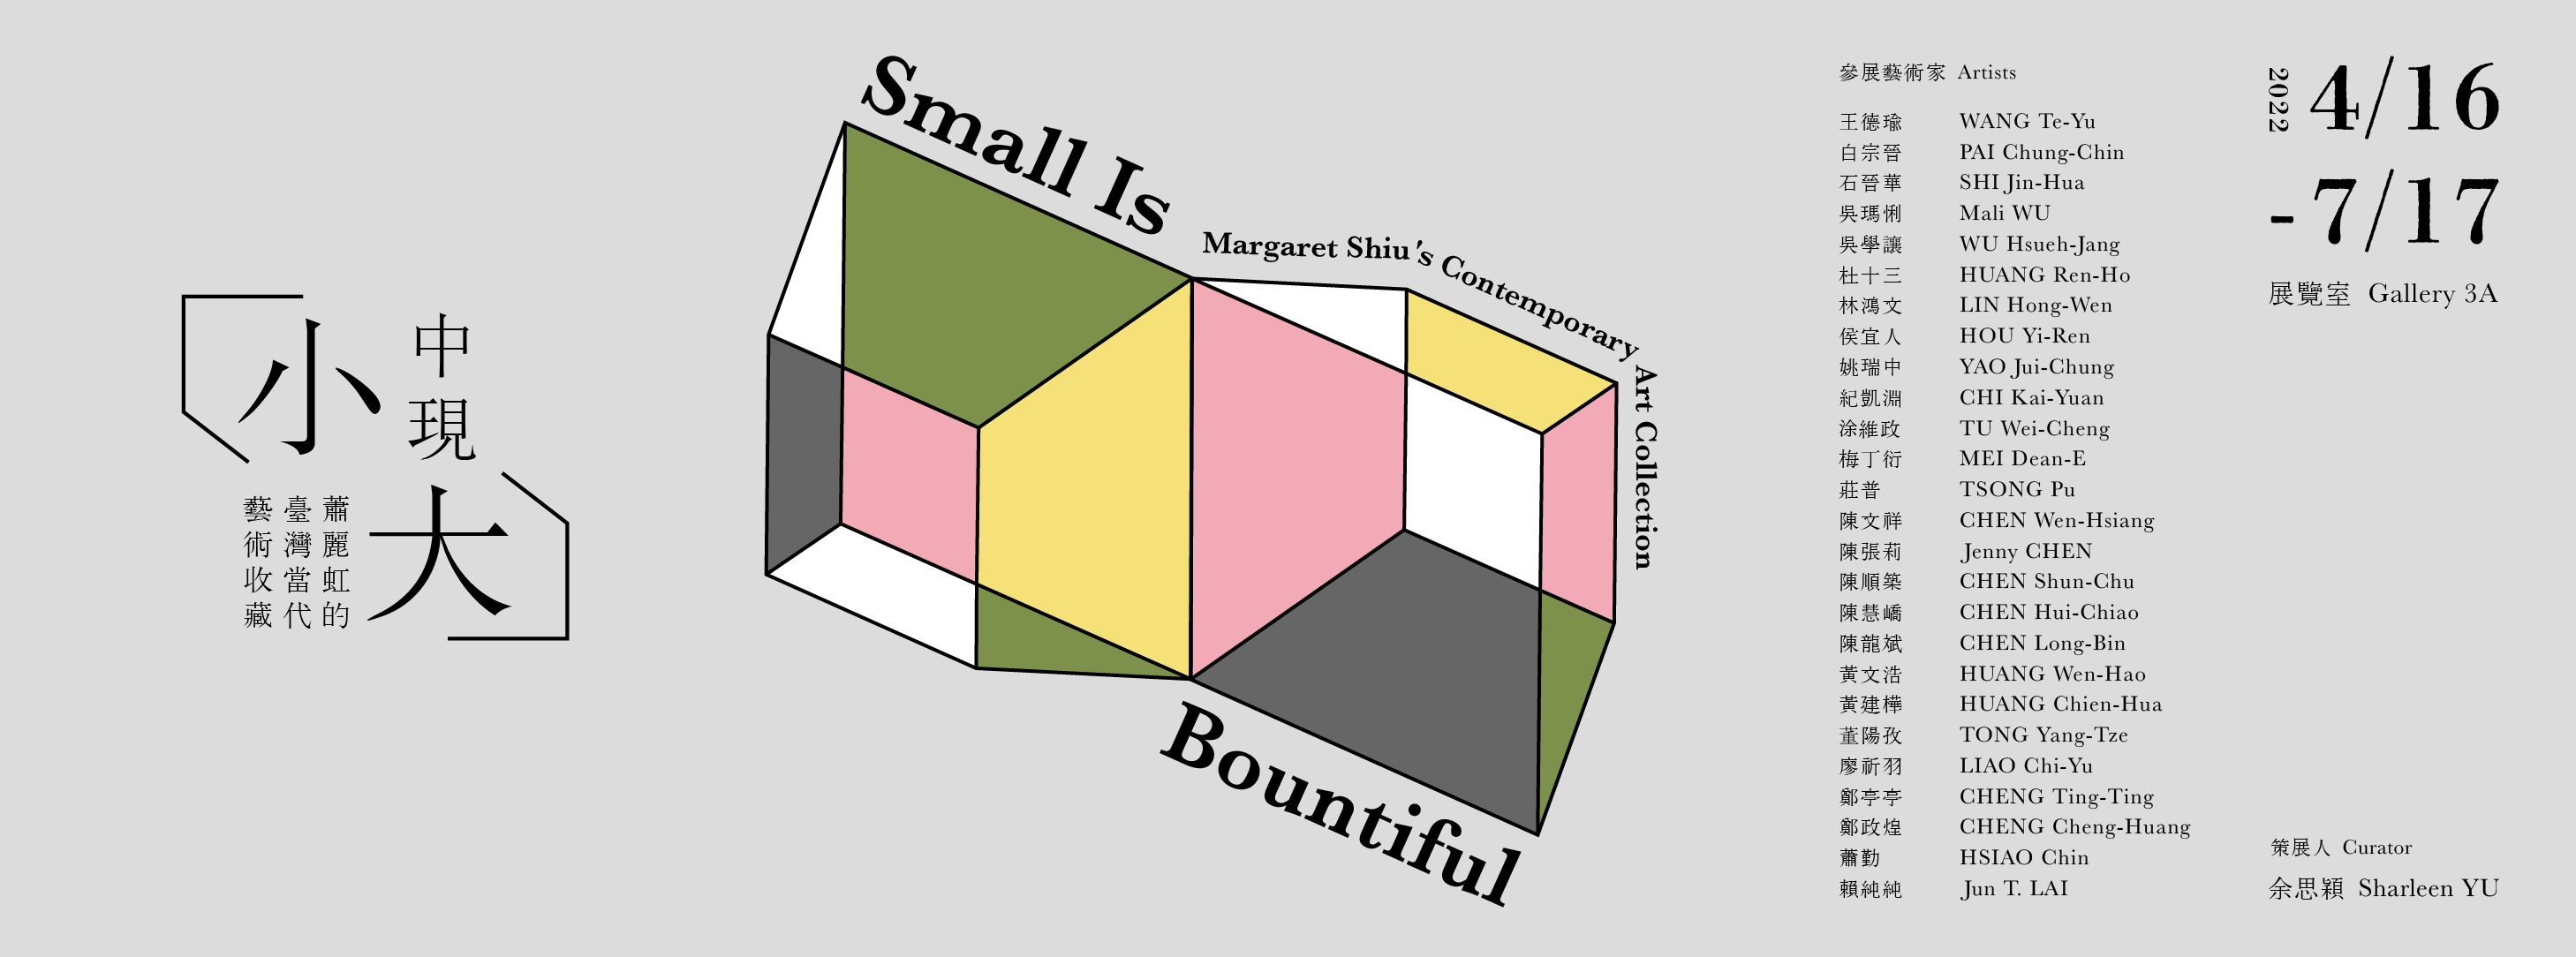 Small Is Bountiful: Margaret Shiu’s Contemporary Art Collection 的圖說